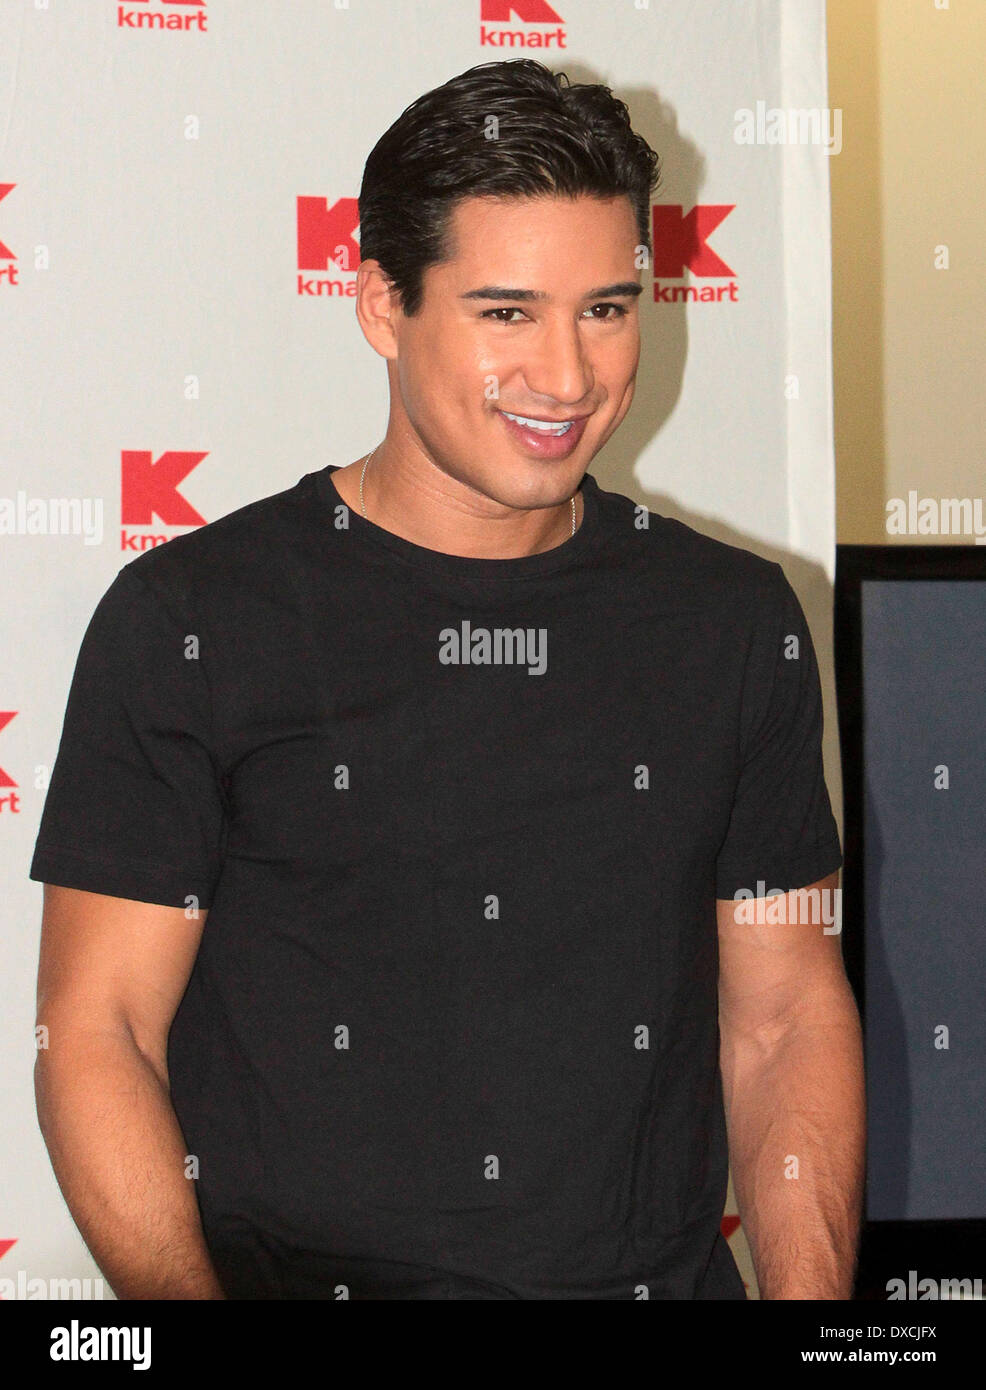 Mario Lopez promotes his new line of underwear 'MaLo' at Kmart in Hollywood  Los Angeles, California - 04.10.12 Featuring: Mario Lopez When: 04 Oct 2012  Stock Photo - Alamy